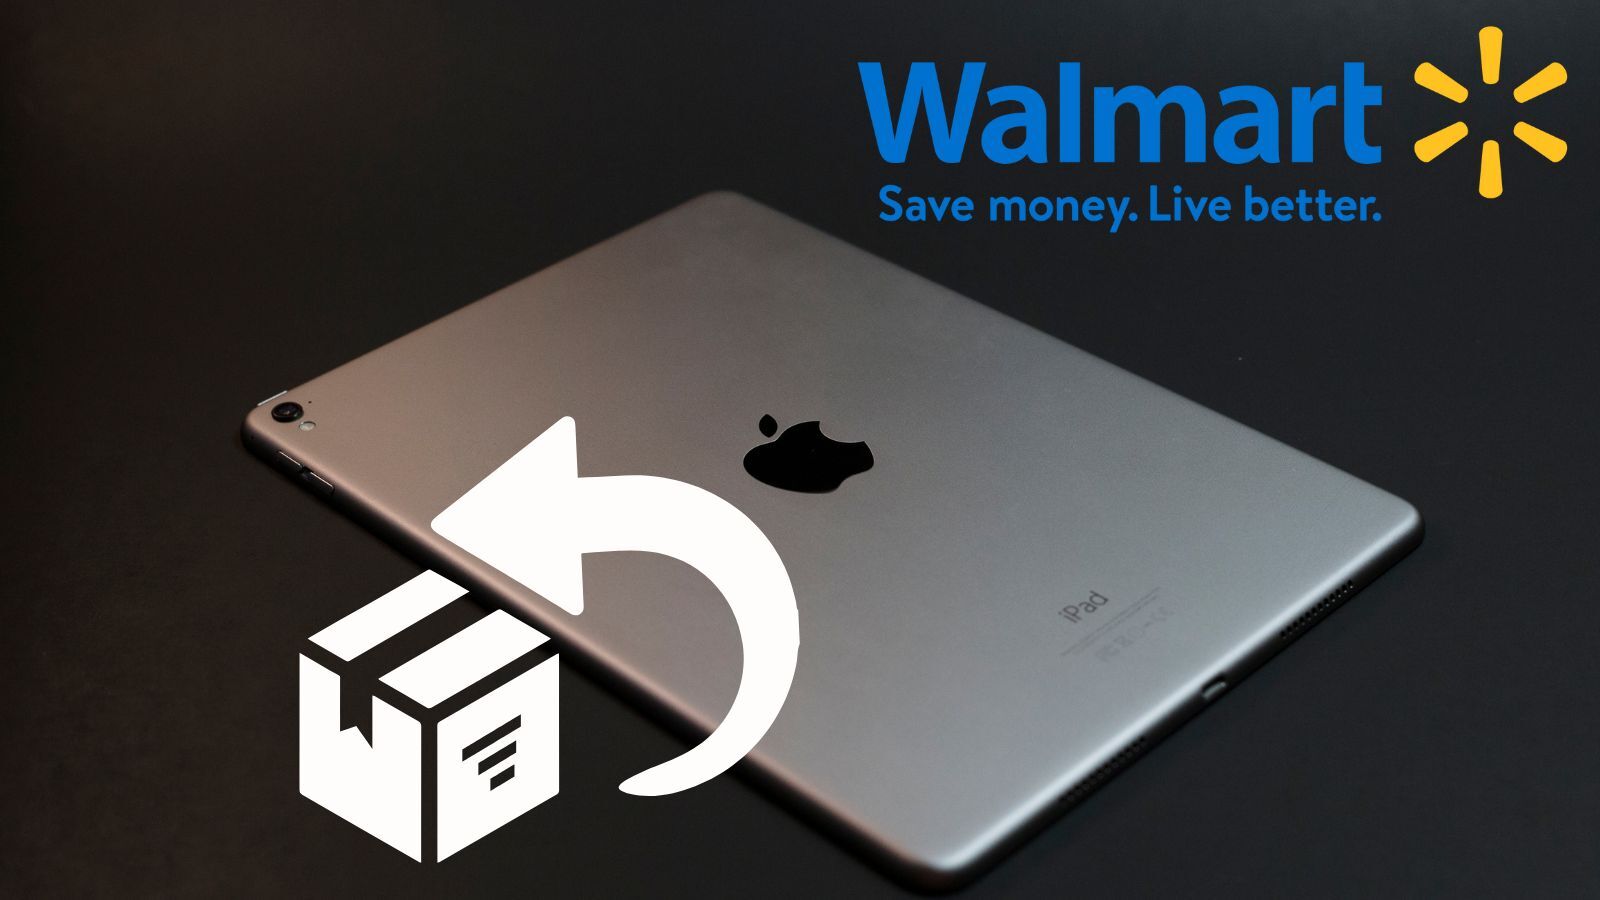 Walmart iPad Return Policy (Here Is What You Should Know!)